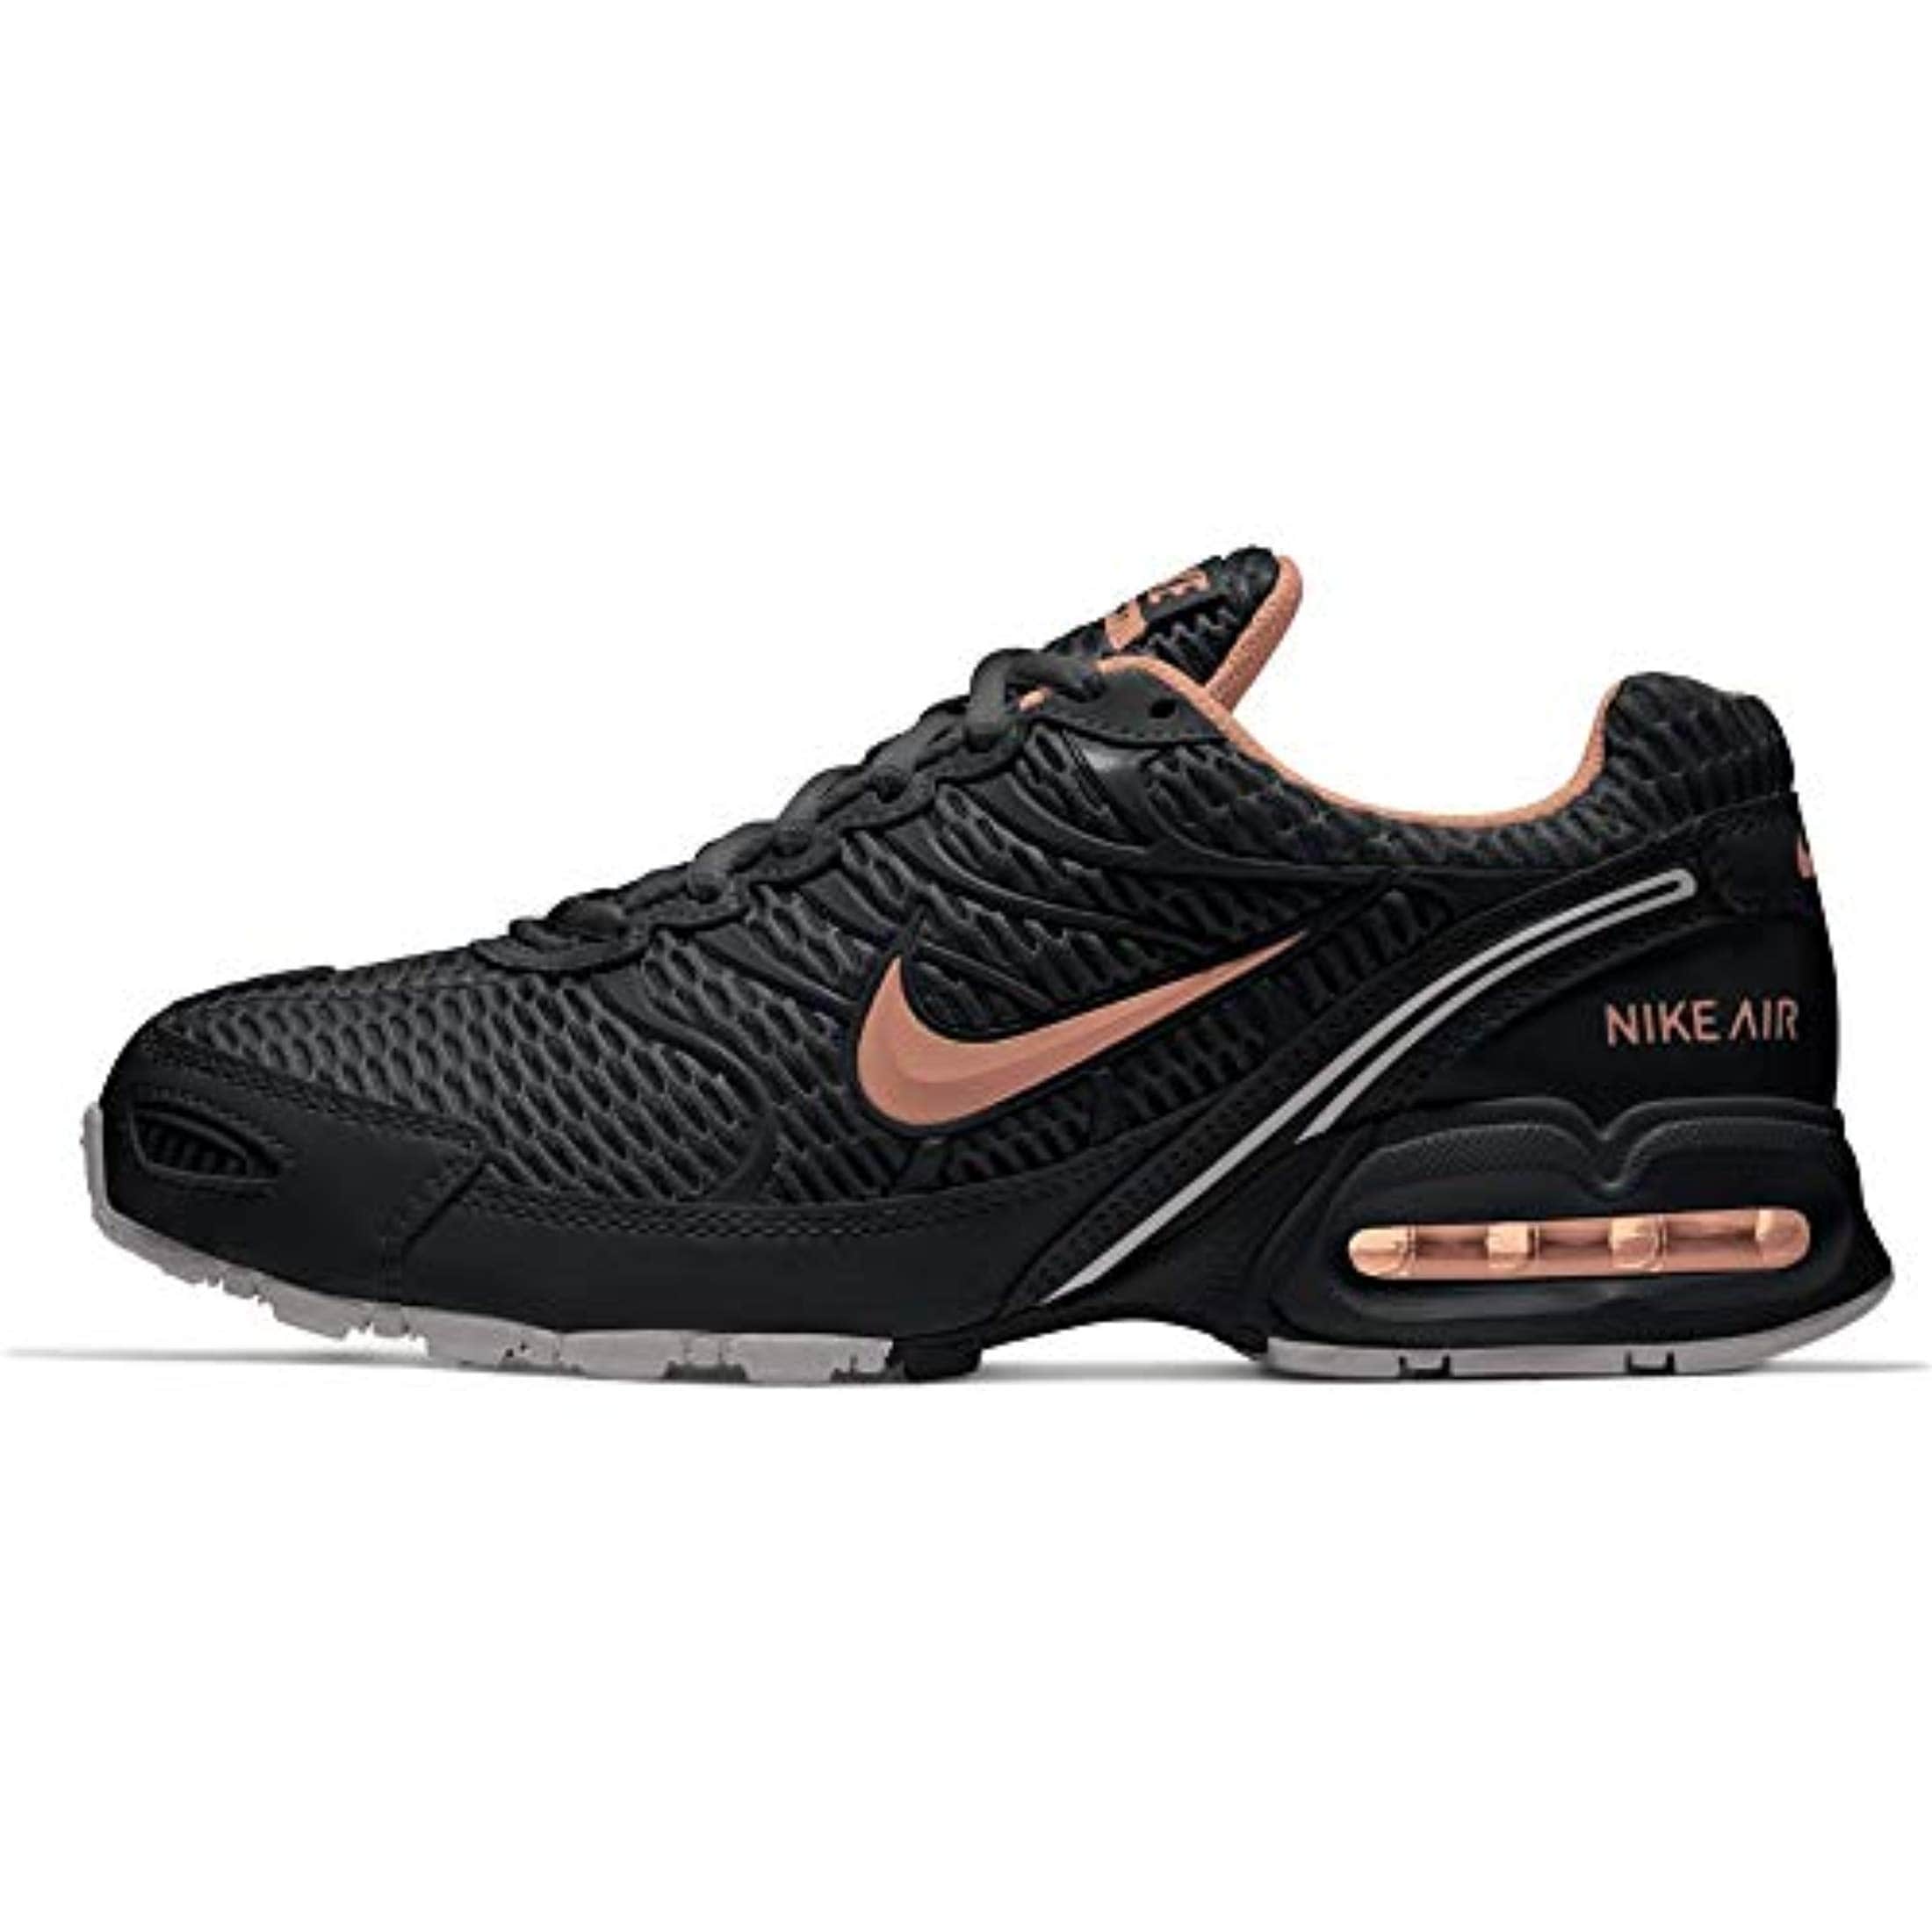 nike women's air max torch 4 running shoes